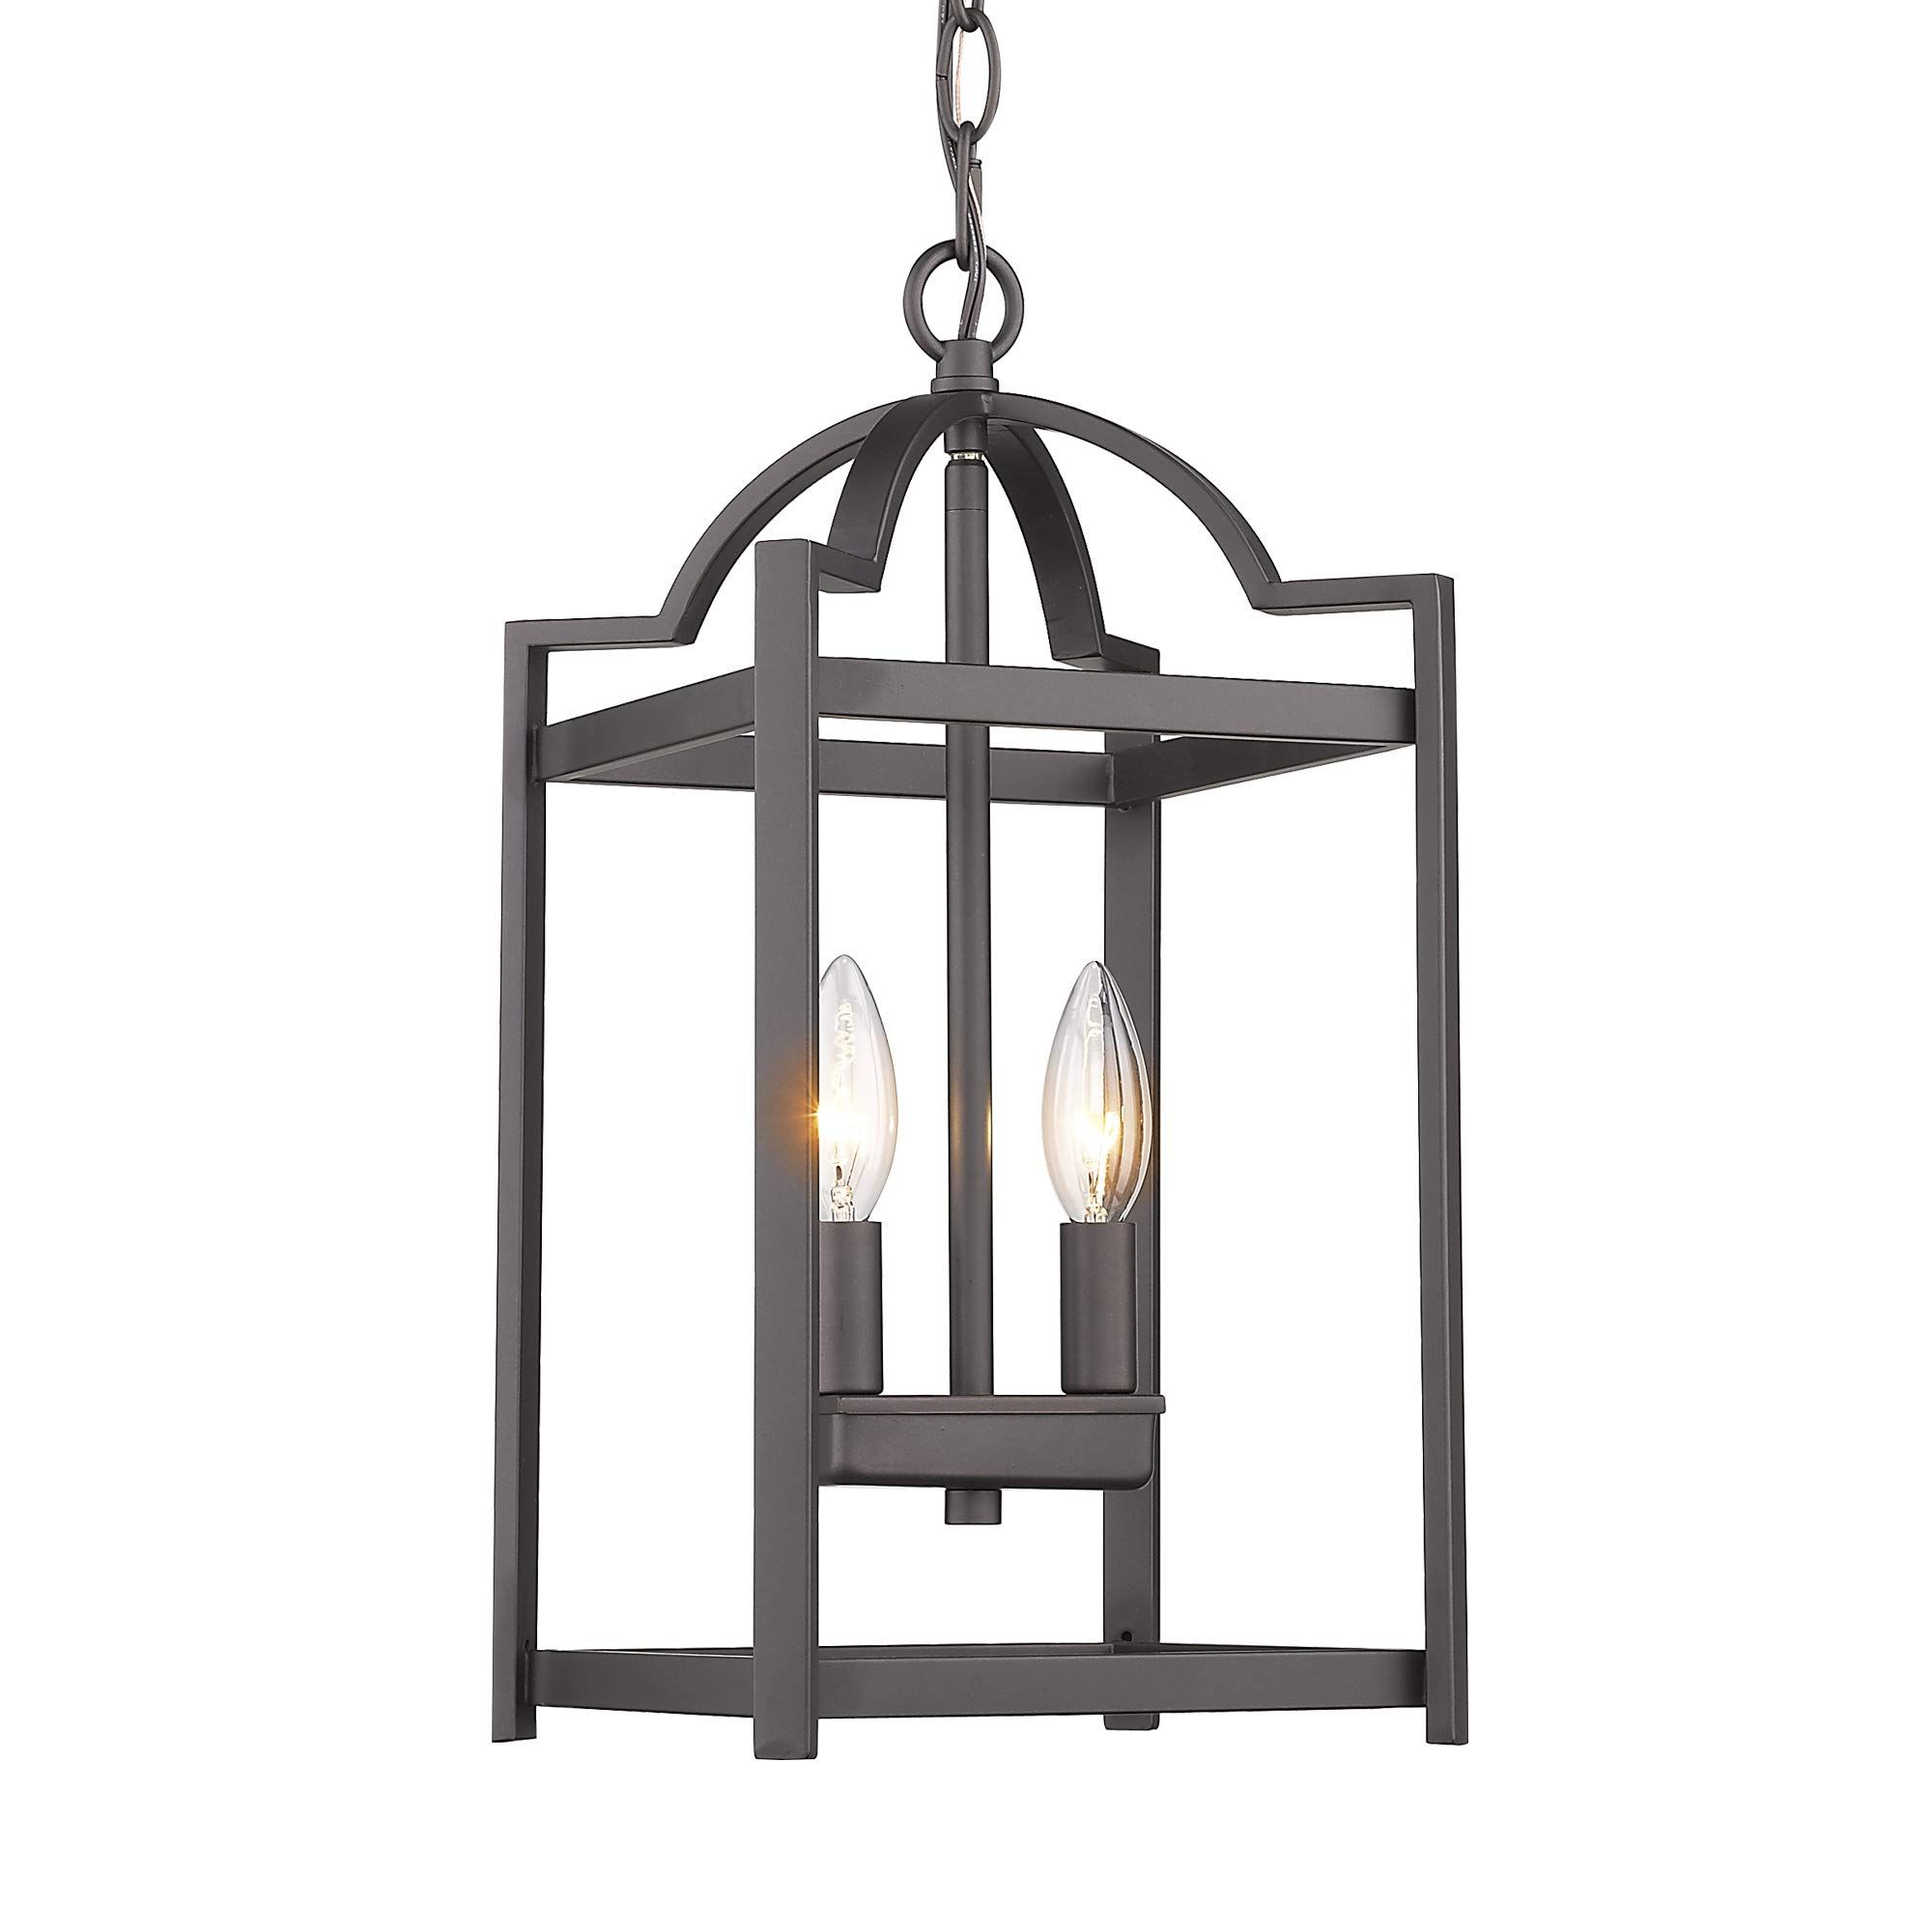 Two Light Lantern Chandeliers In 2019 Emliviar 2 Light Lantern Pendant Light, Foyer Chandelier Hanging Light  Fixture, Oil Rubbed Bronze Finish, P3038 2 – – Amazon (View 3 of 15)